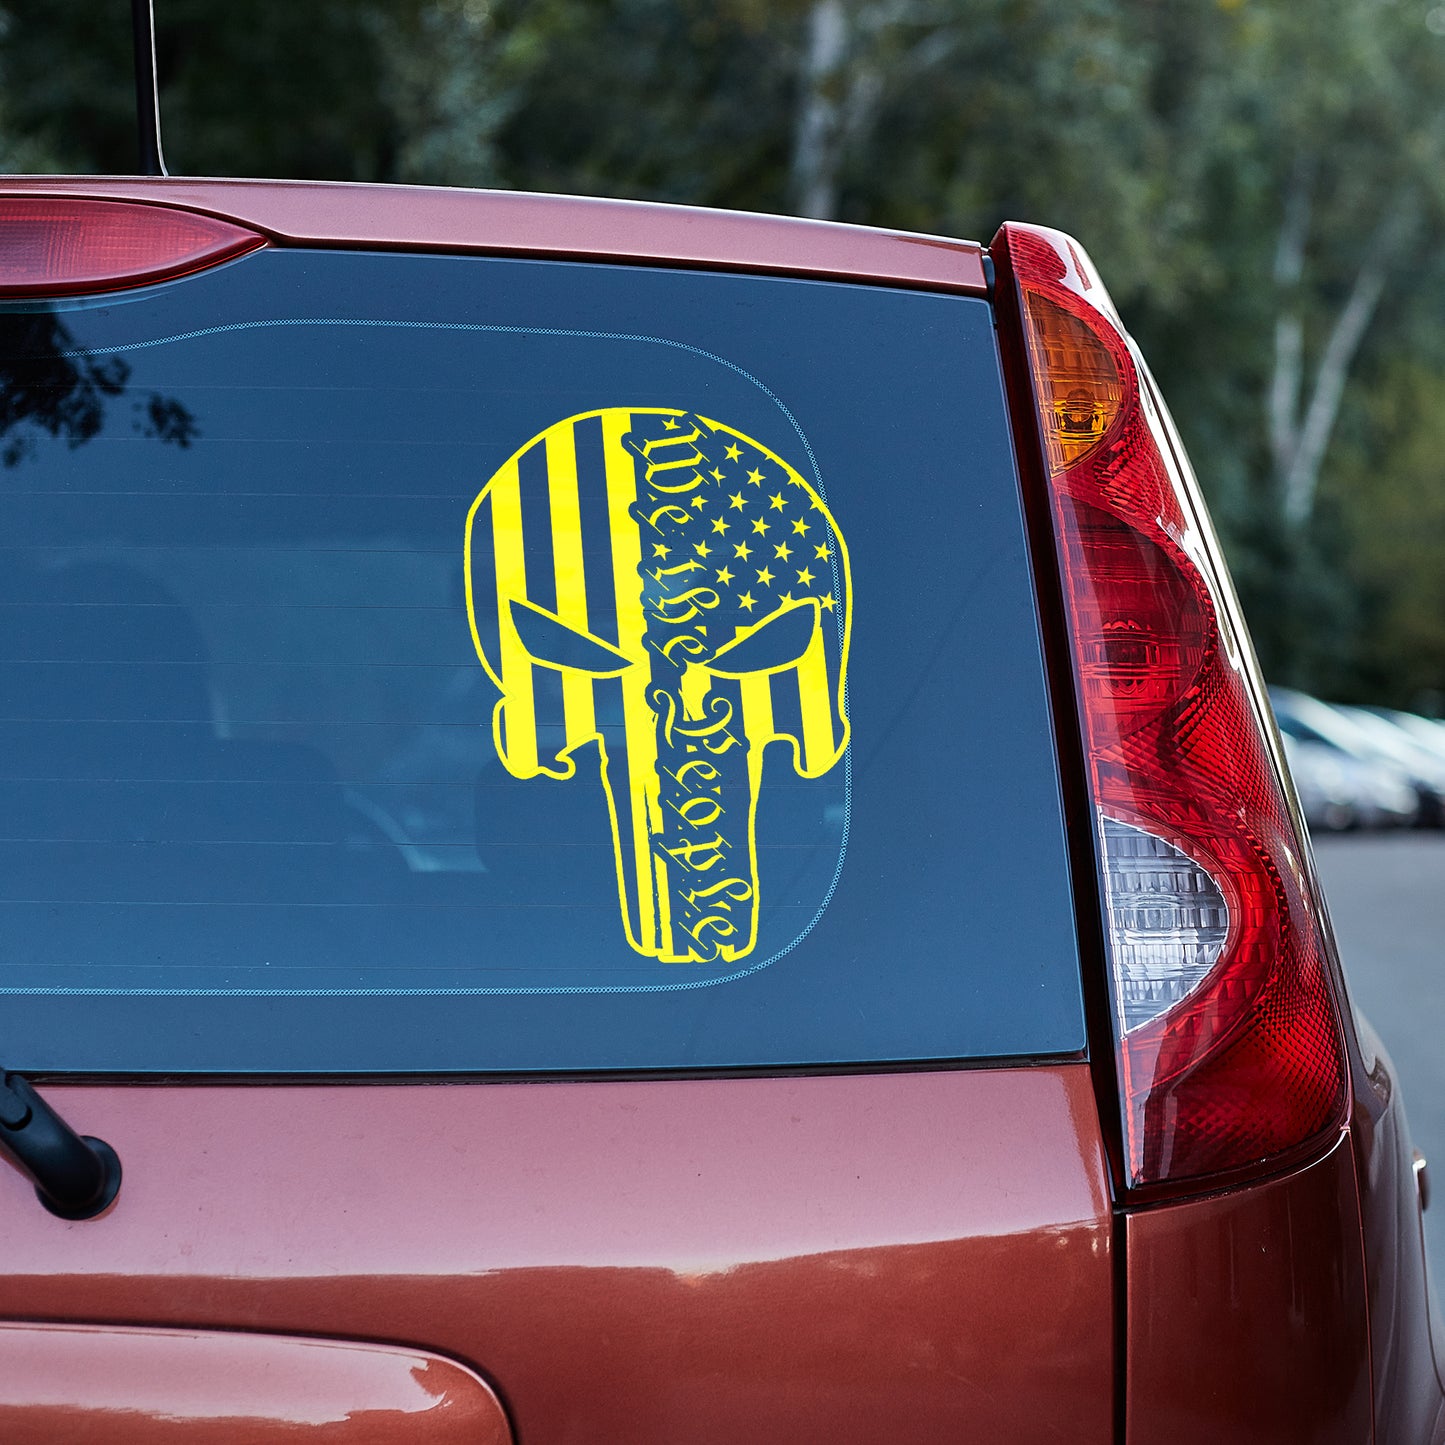 We the people patriotic skull vinyl decal 1776 decal stickers Decals for cars Decals for Trucks decals for tumblers freedom liberty minivan sticker SUV decals truck decals window decal car Window decals window decor